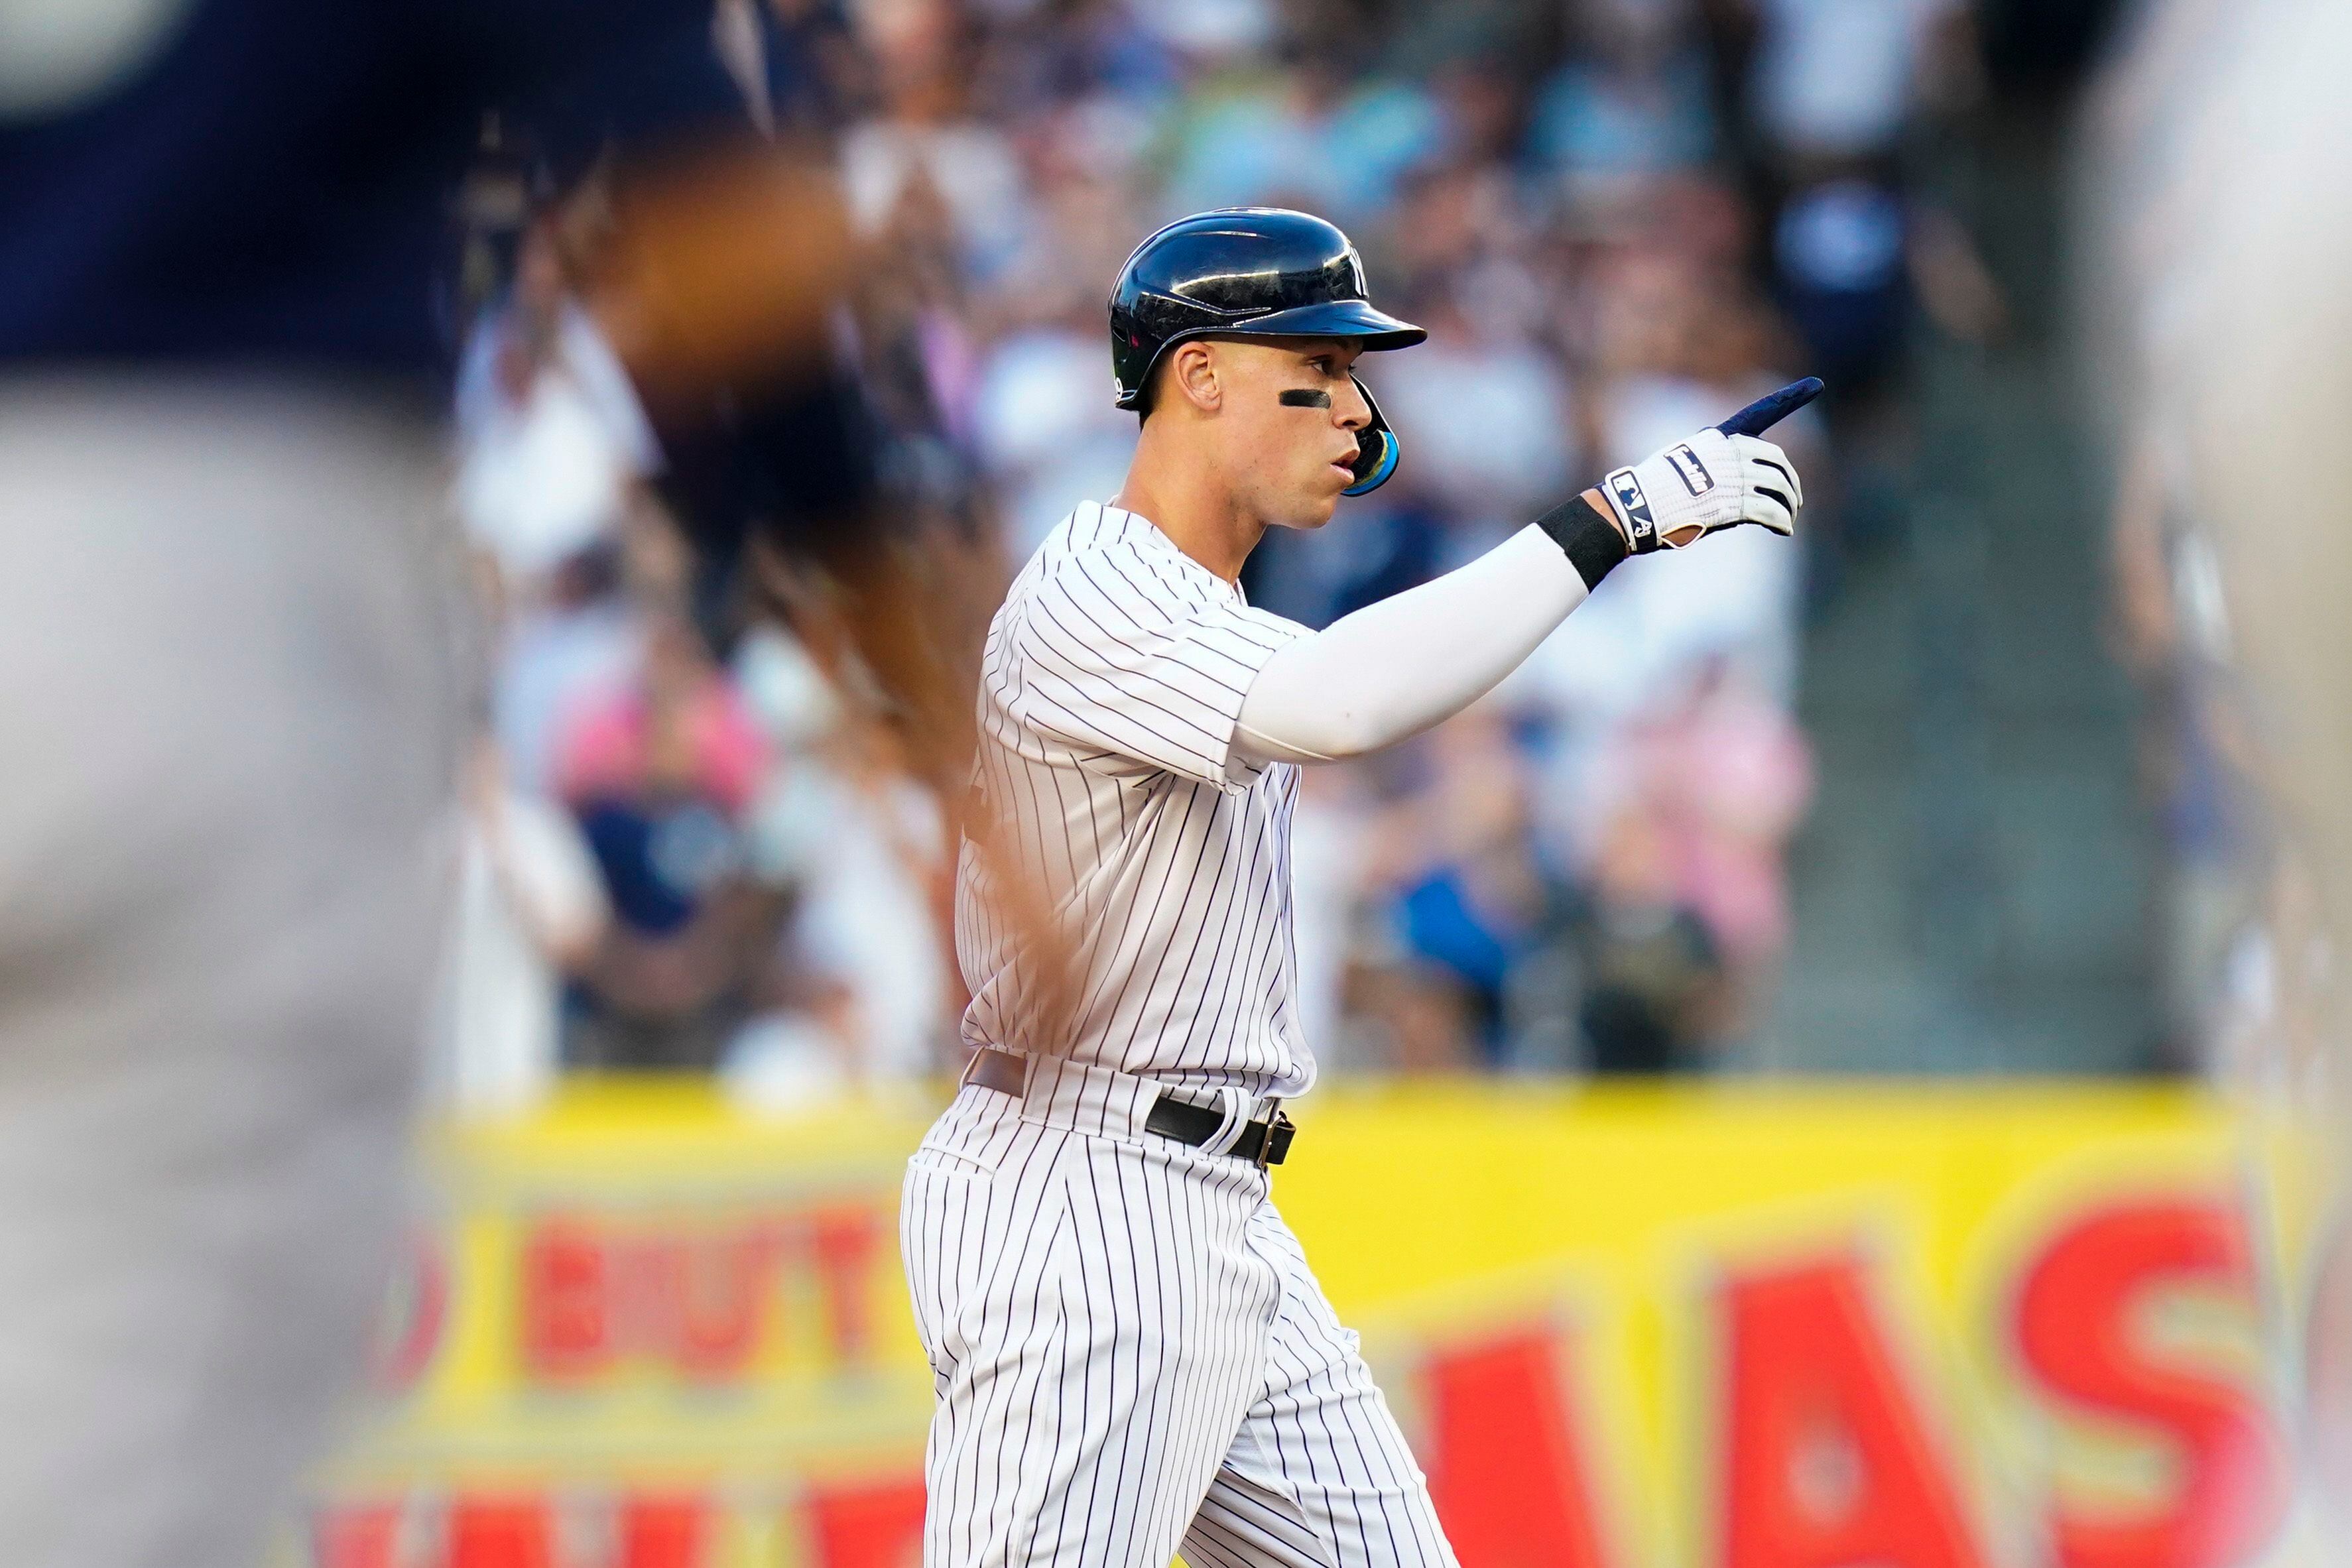 Aaron Judge blasts 43rd home run, Yankees first team to 70 wins in